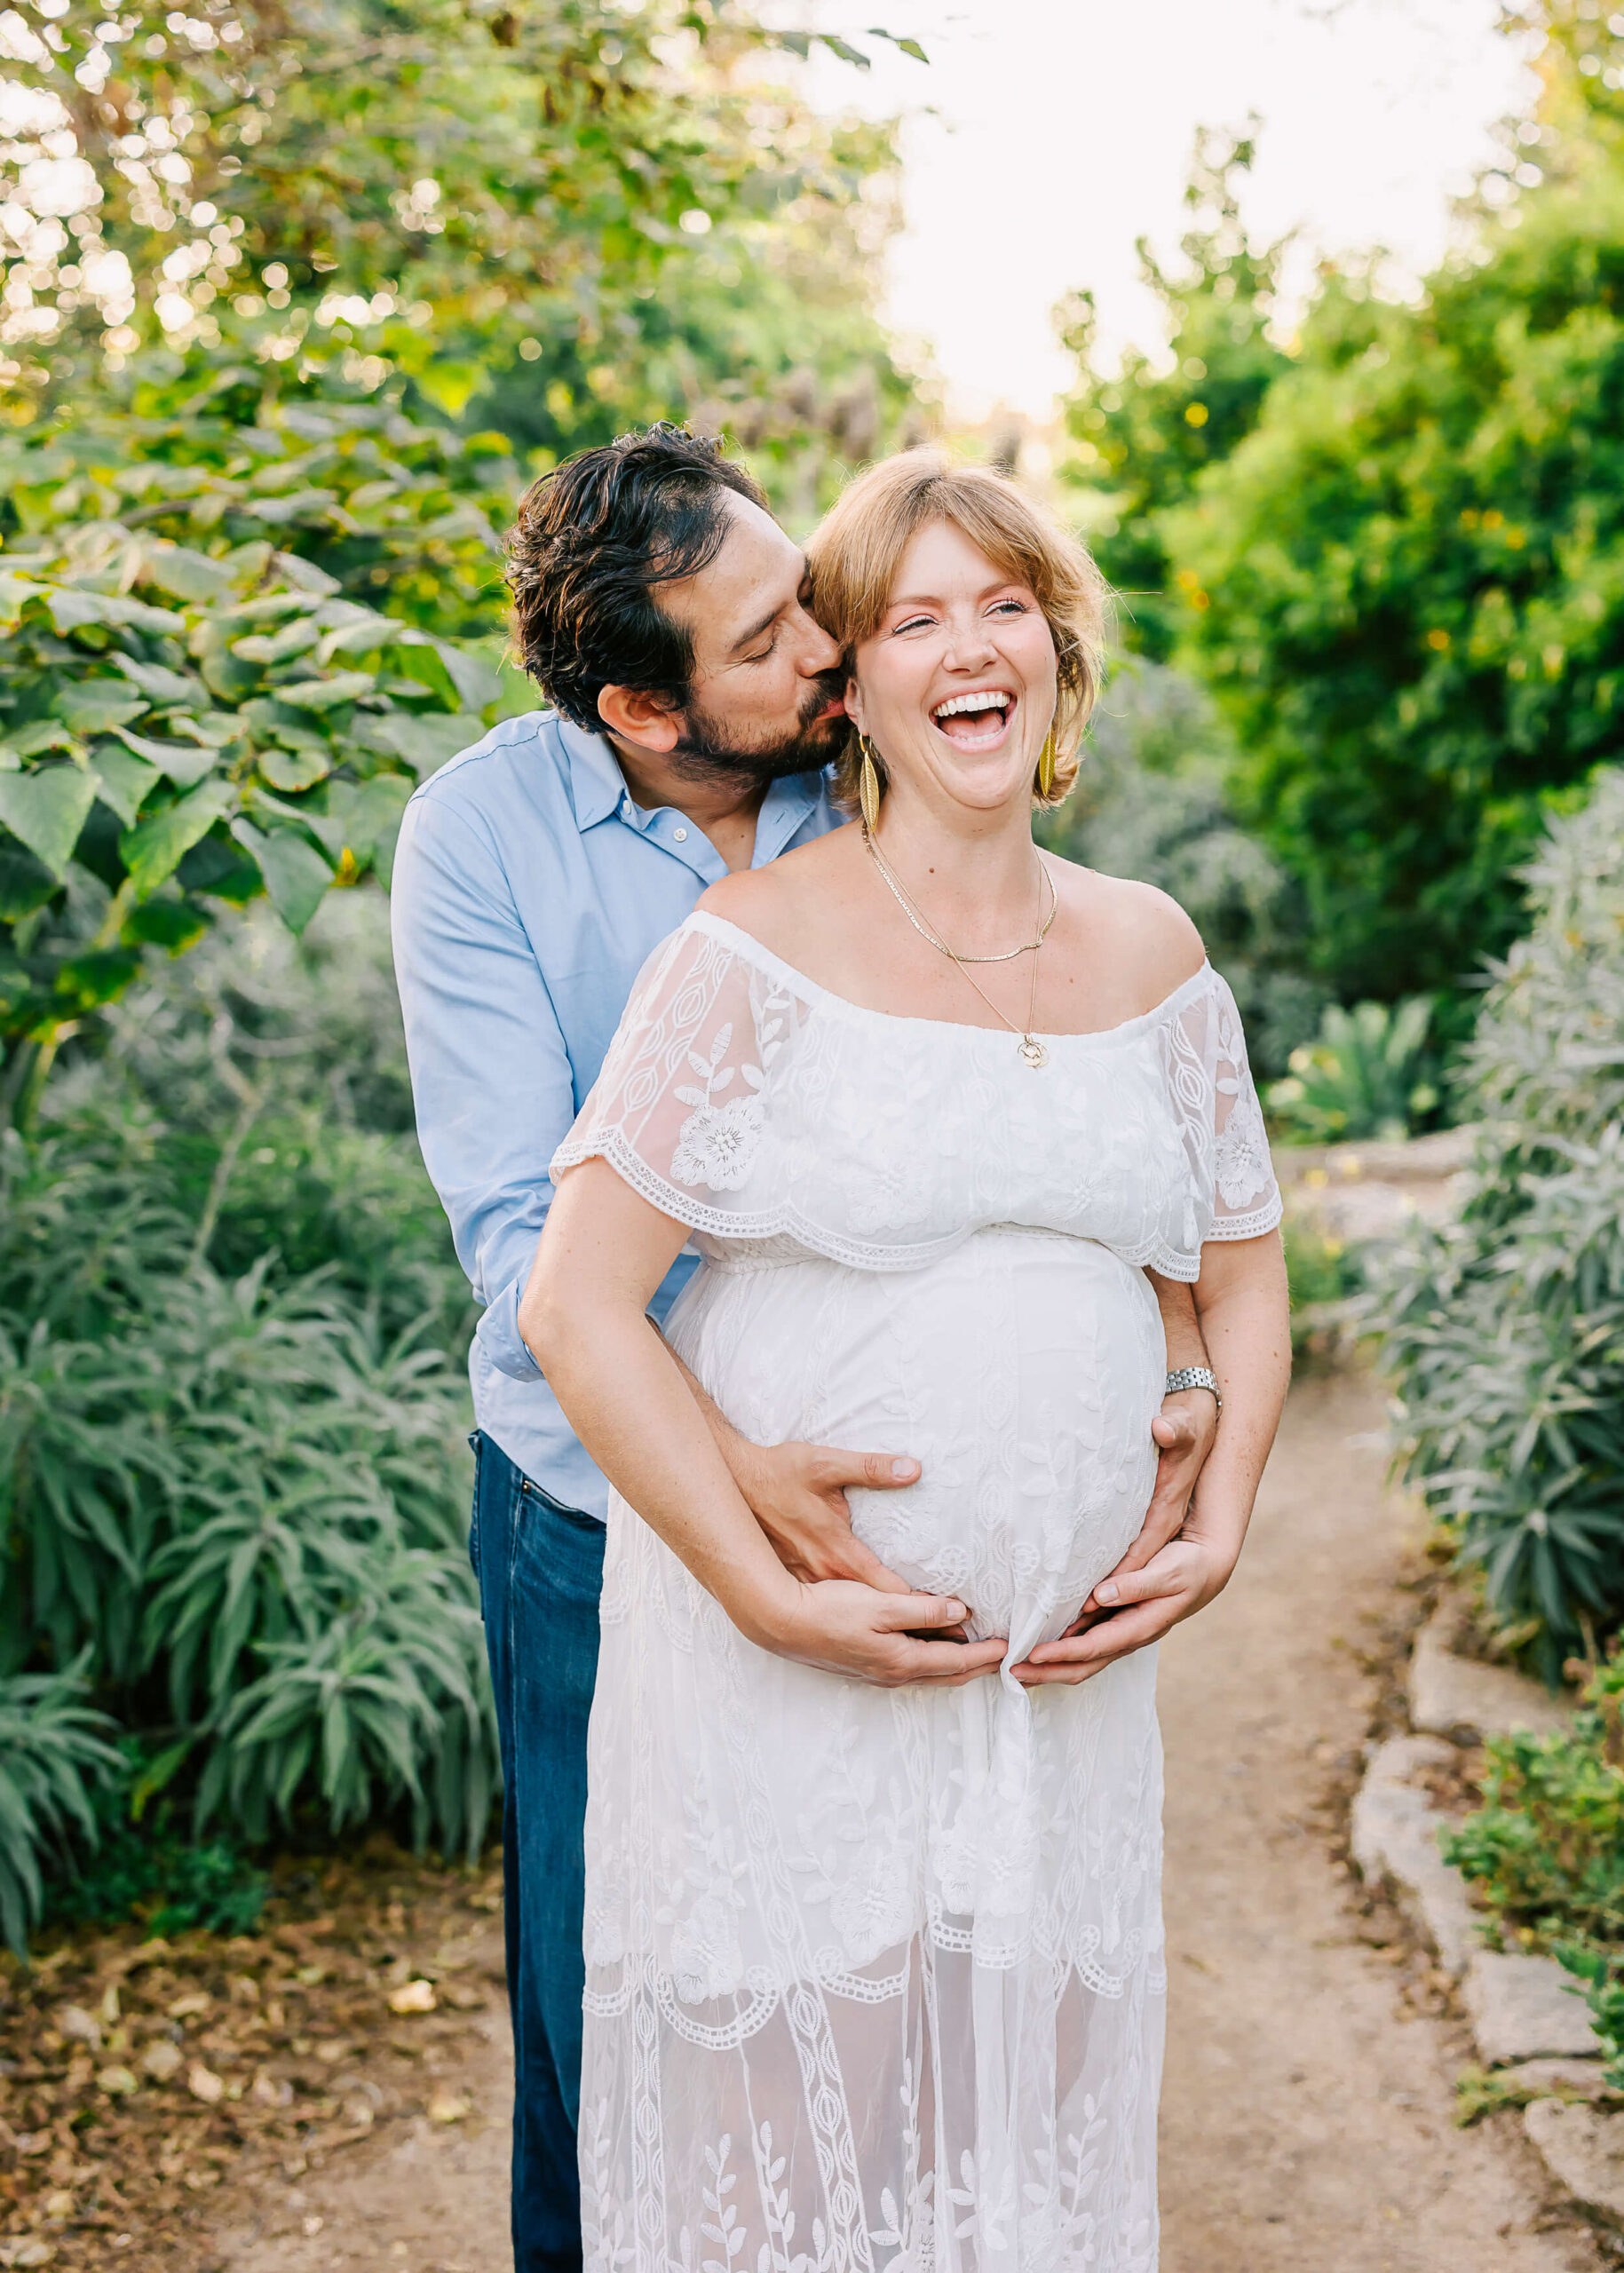 Husband making wife laugh during maternity session.